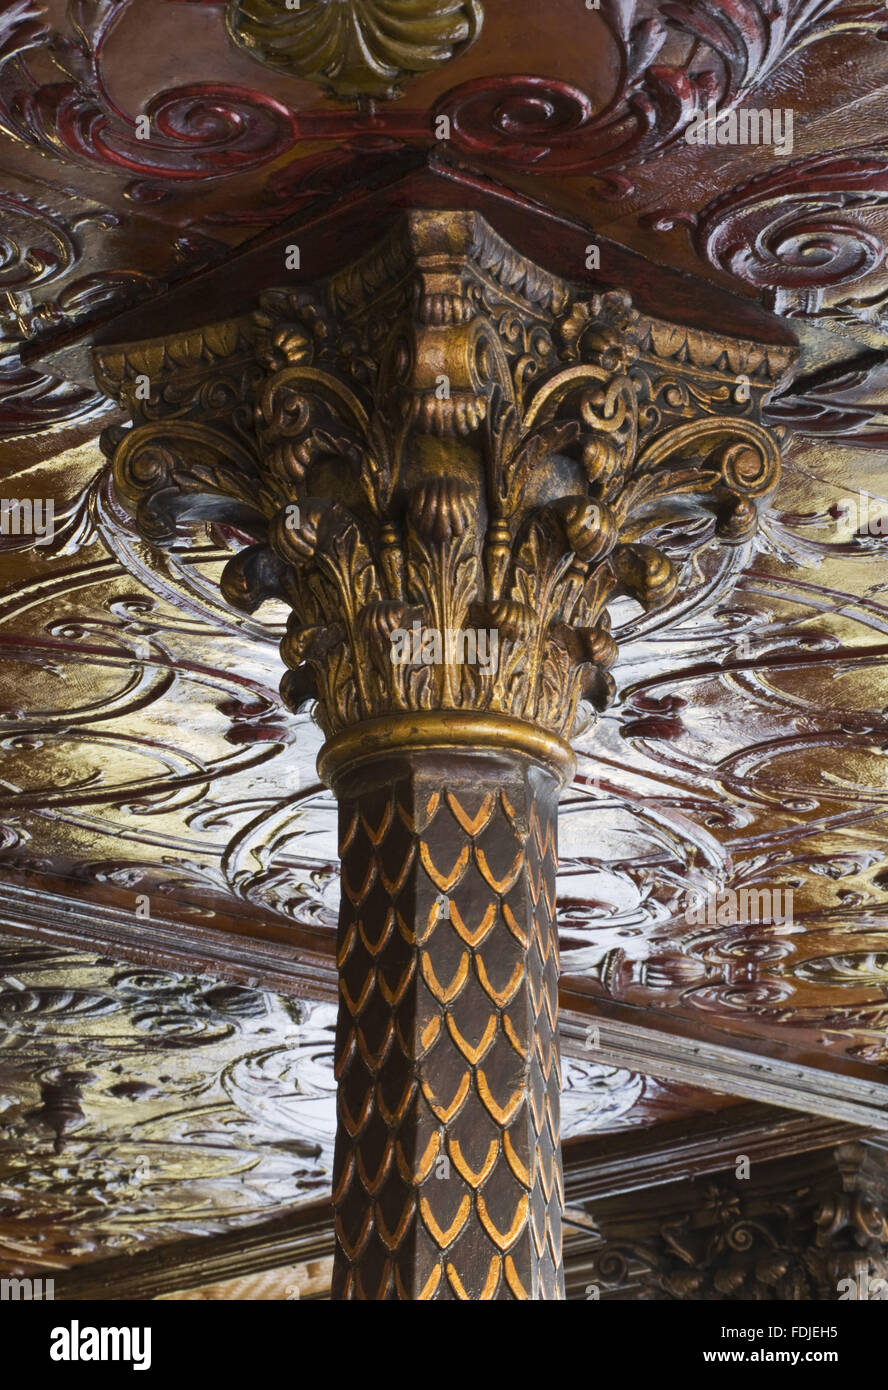 A close view of one of the elaborate capitals on the columns supporting the moulded ceiling of The Crown Bar, Great Victoria Street, Belfast. Formerly known as the Crown Liquor Saloon, the pub building dates from 1826 but the wonderful late Victorian craf Stock Photo